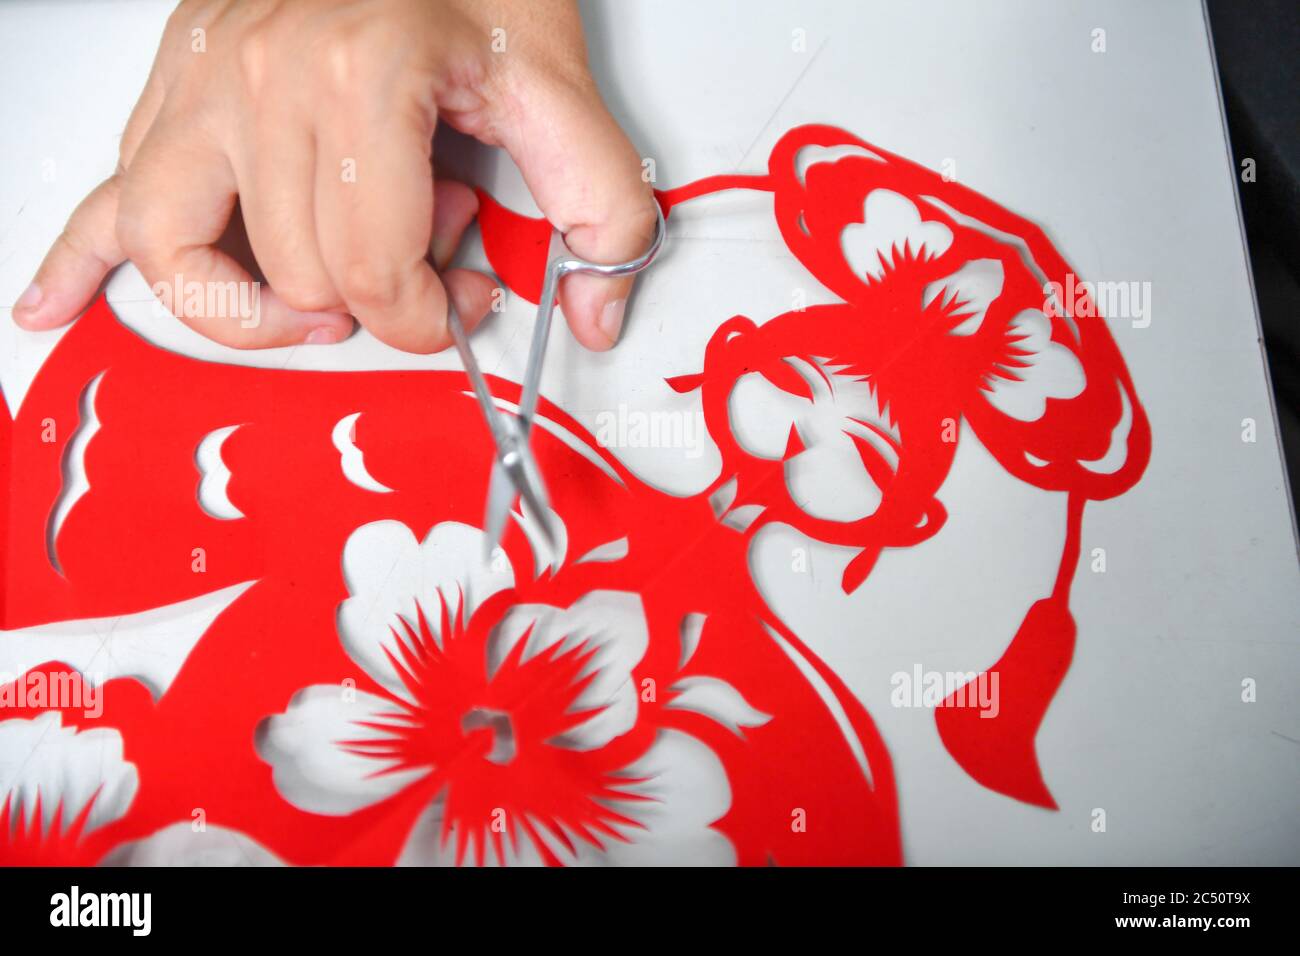 Changchun, China's Jilin Province. 29th June, 2020. Hua Li makes a papercutting work in Jilin City, northeast China's Jilin Province, June 29, 2020. Hua Li became disabled due to illness when she was young. She decided to face up to the hardship and learned papercutting with the help of her family. In order to promote papercutting, Hua and her husband set up a papercutting workshop in Jilin which provides free papercutting training for disabled people. Credit: Zhang Nan/Xinhua/Alamy Live News Stock Photo